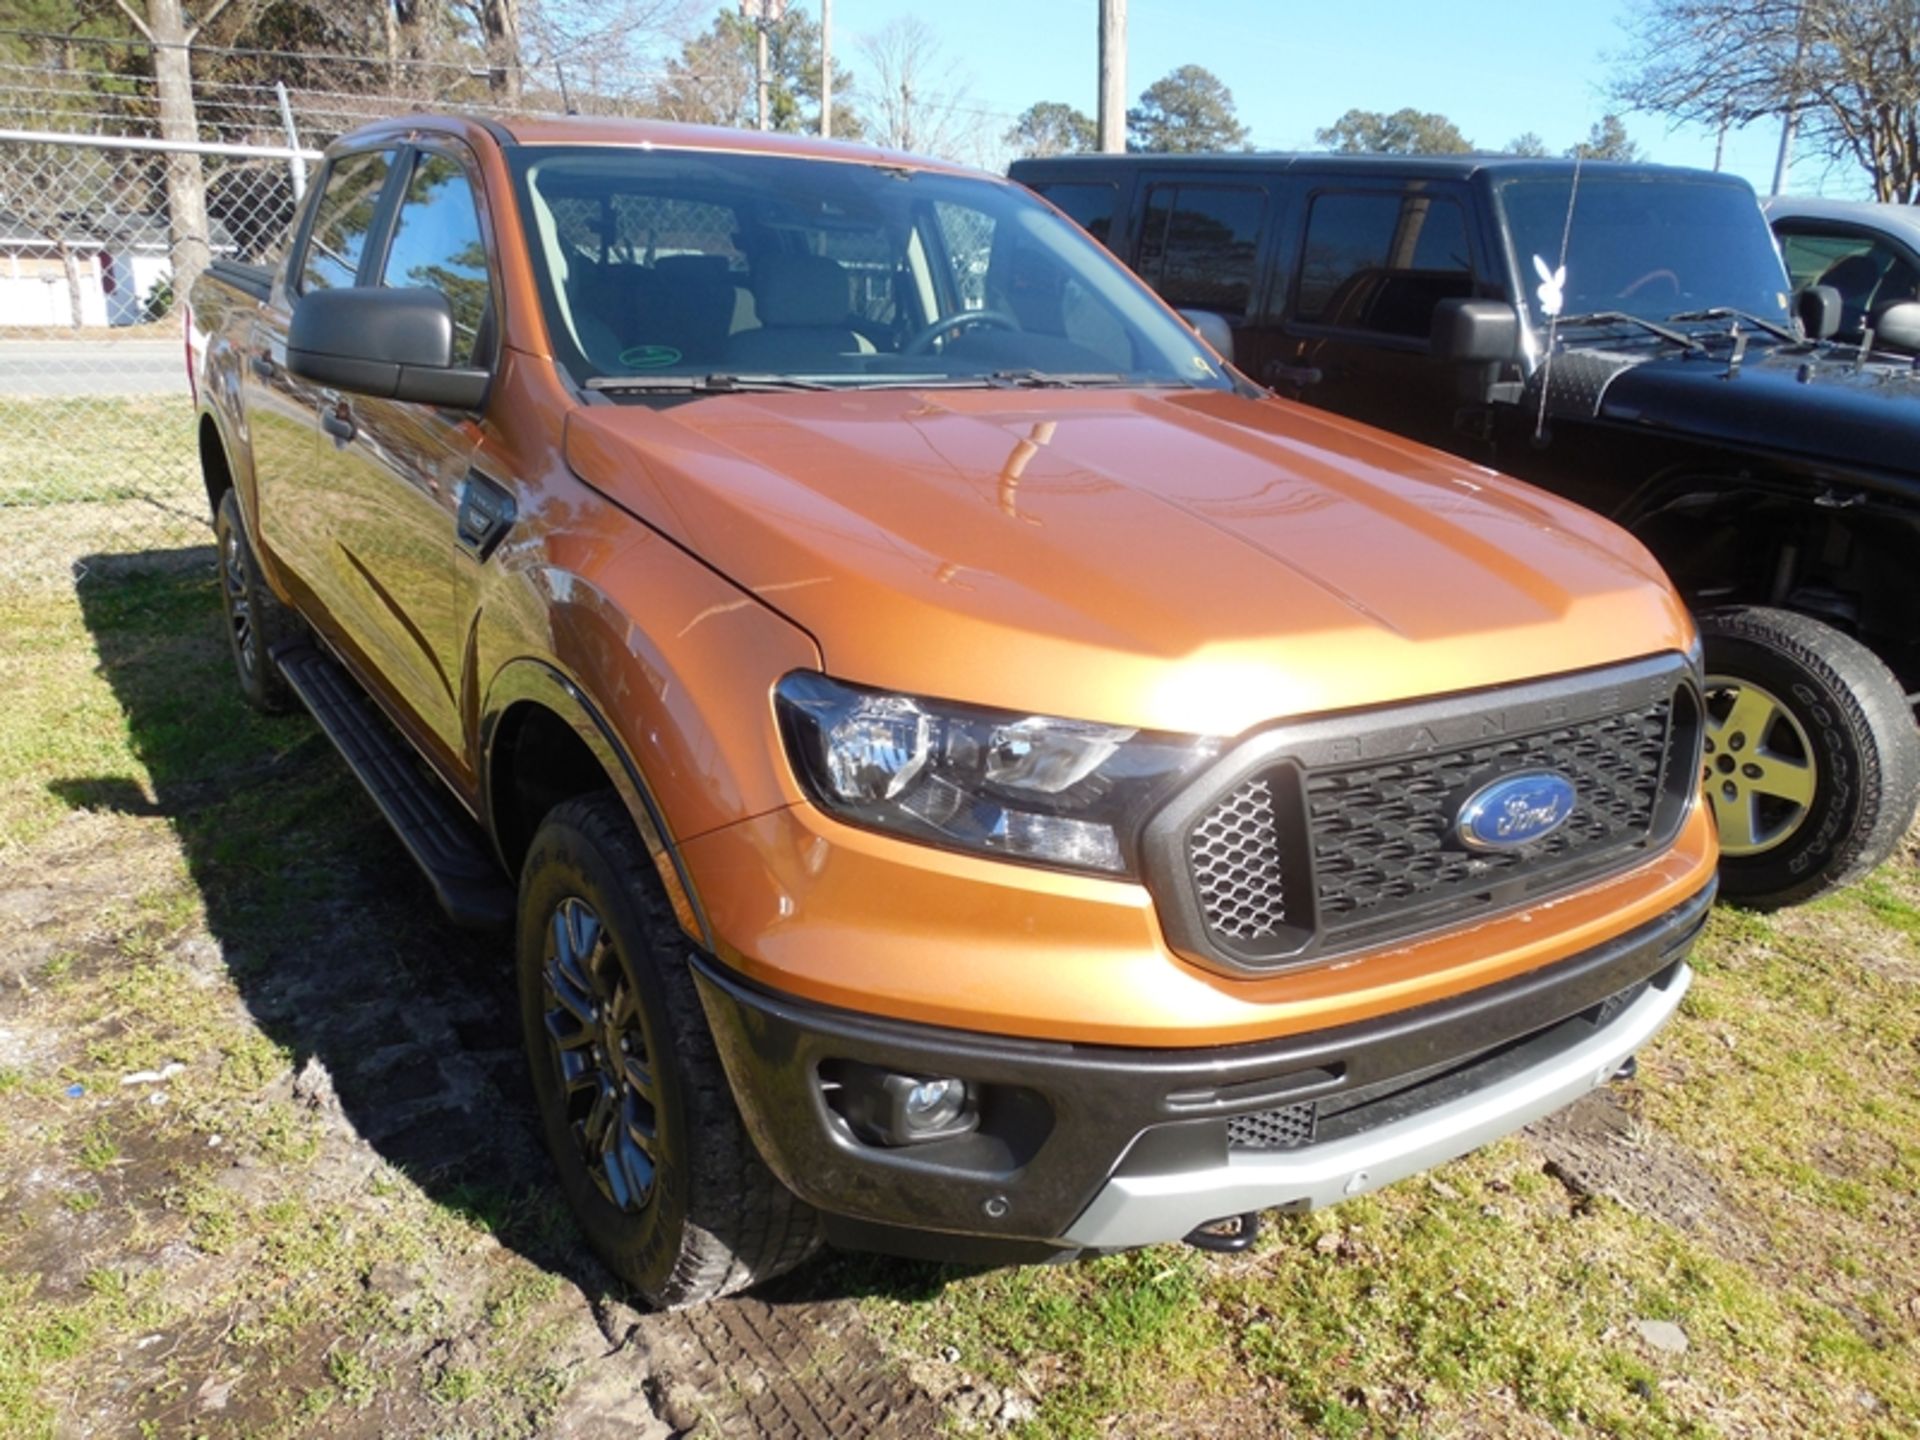 2019 FORD Ranger XLT pickup - crew cab, 4WD, bed cover, 12,230 miles - Image 2 of 6